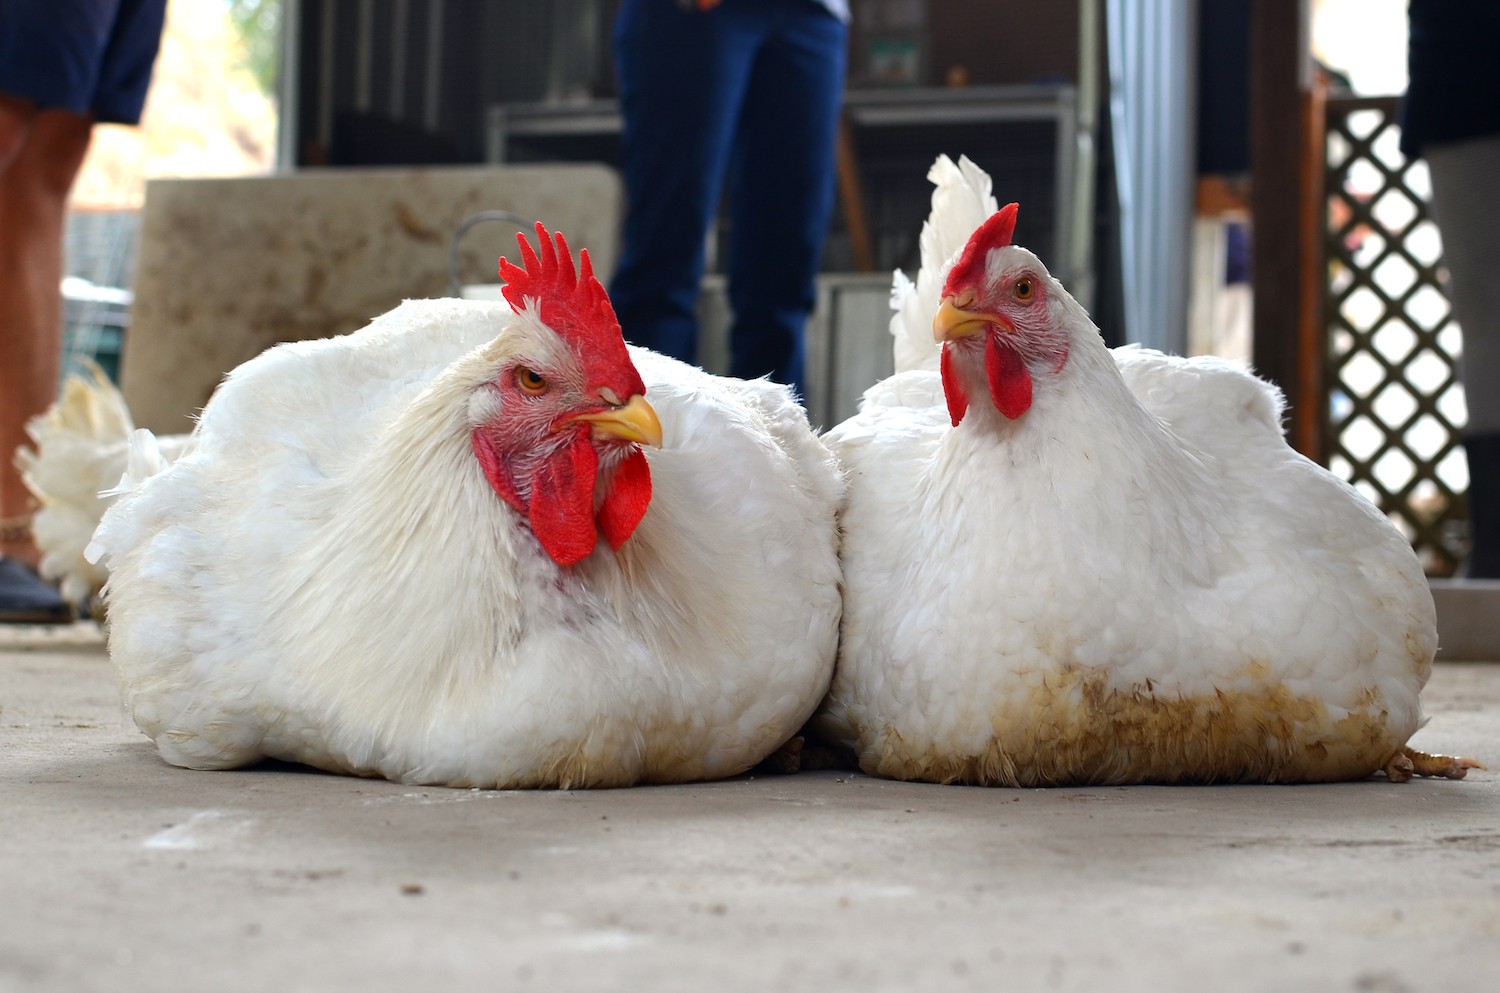 Two broiler chickens on the ground June 2020